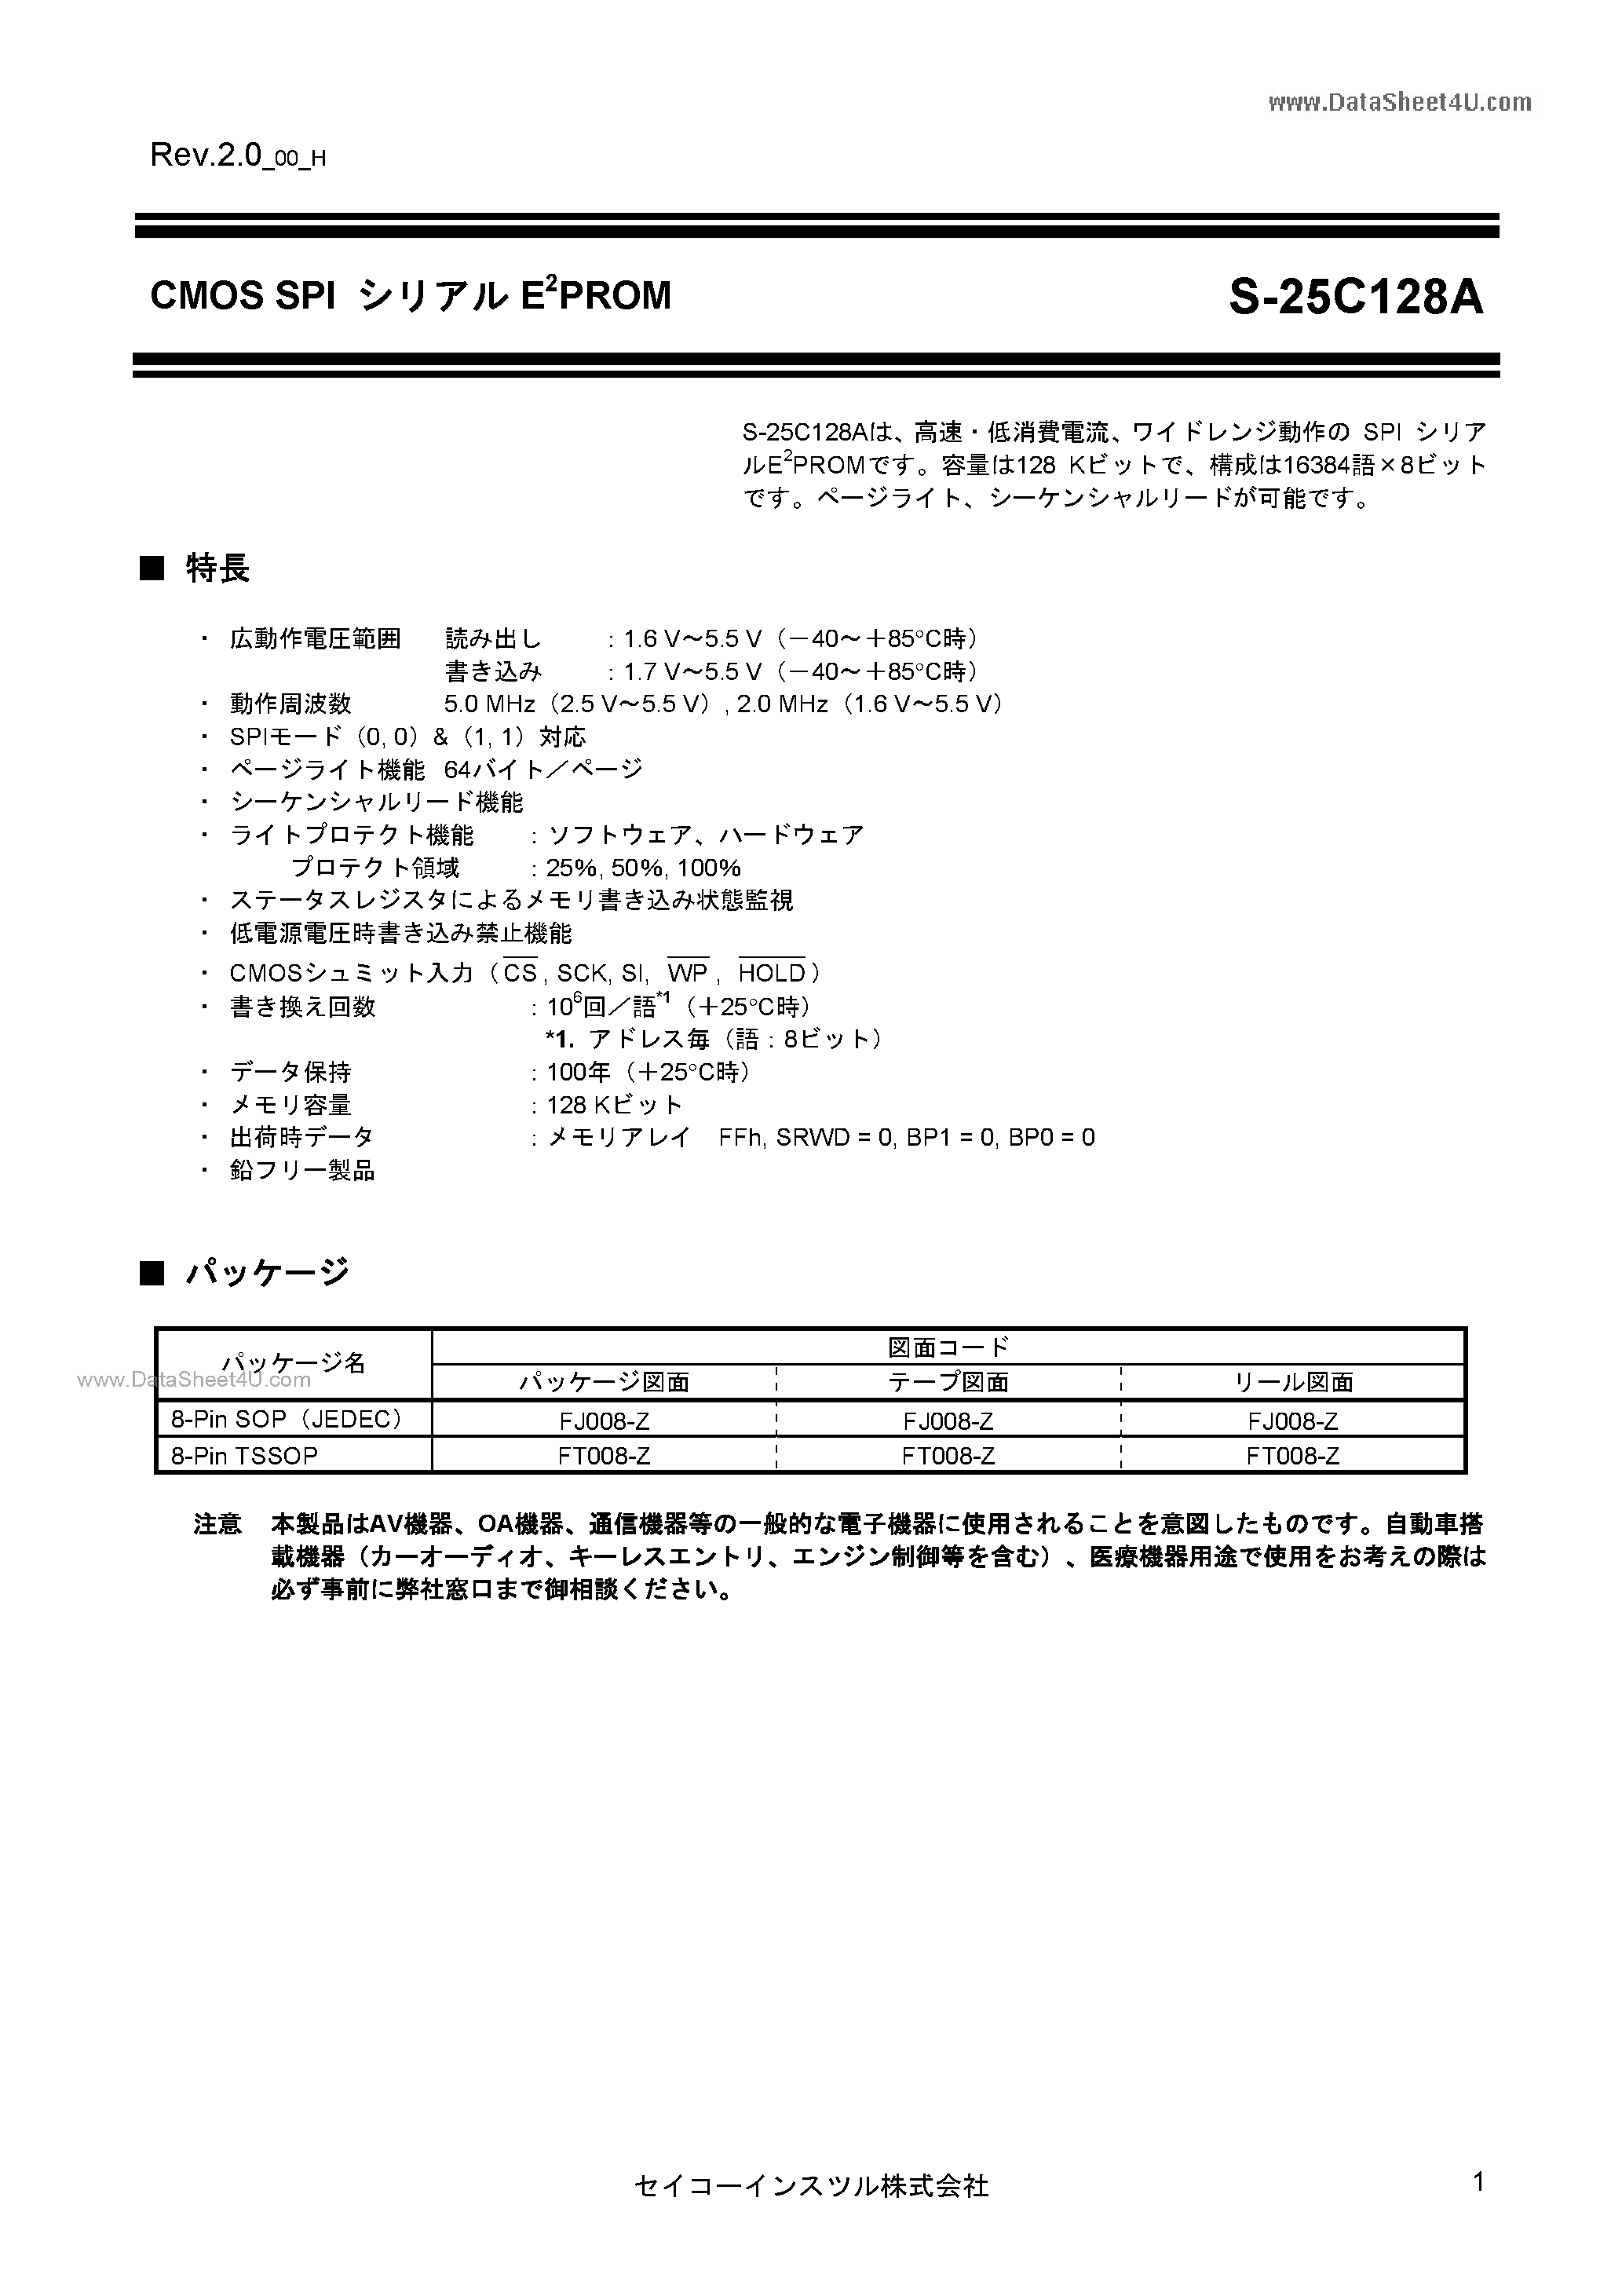 Datasheet S-25C128A - S-25C128A page 1